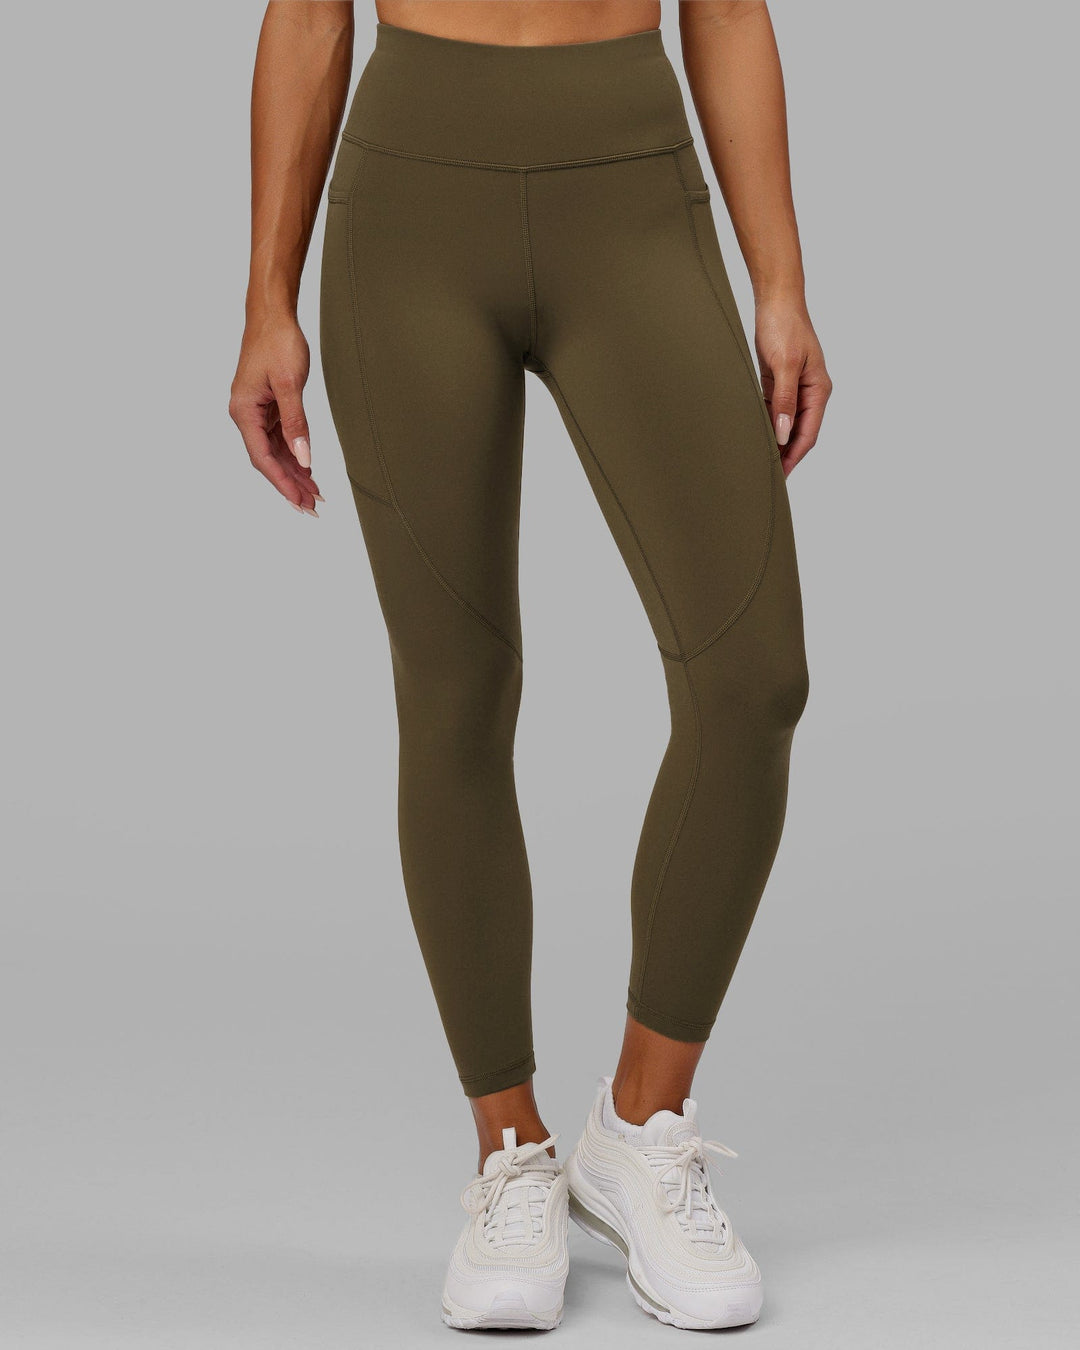 Woman wearing Rep 7/8 Length Tight - Army Green